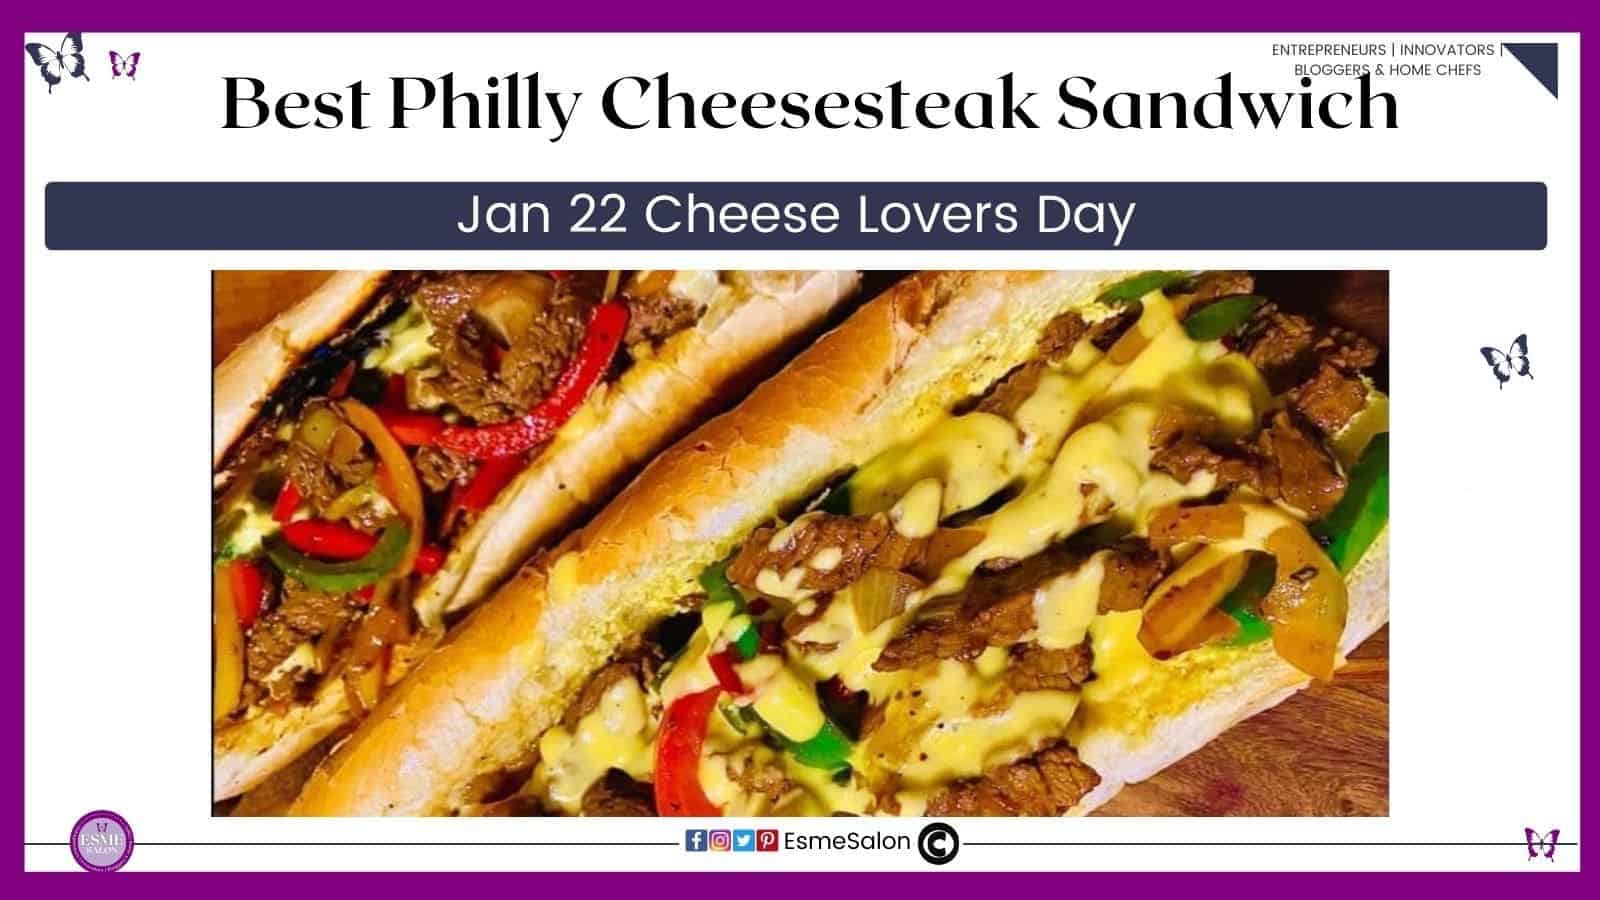 an image of 2 Philly Cheesesteak Sandwiches